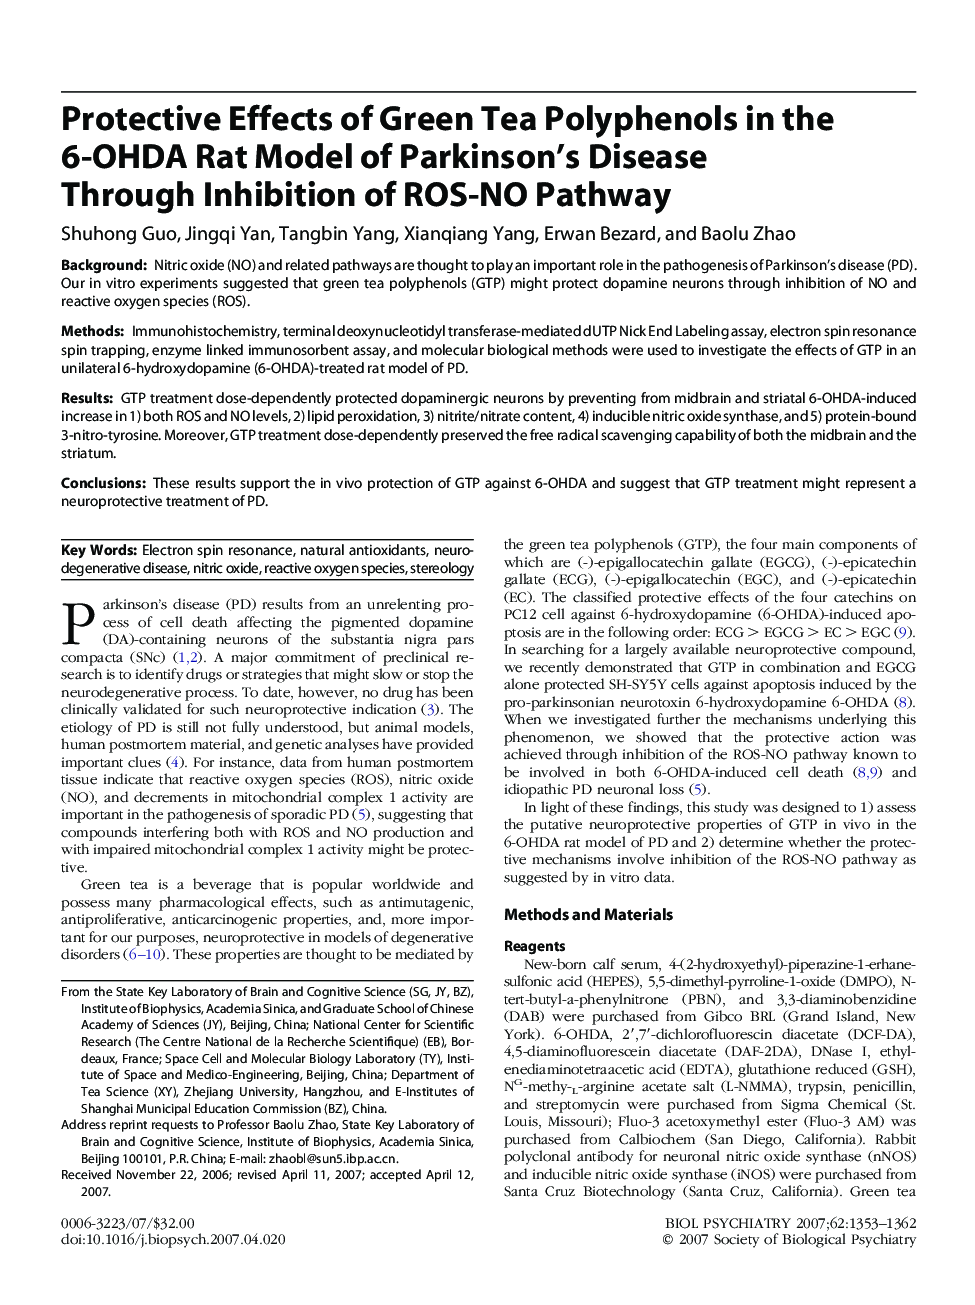 Protective Effects of Green Tea Polyphenols in the 6-OHDA Rat Model of Parkinson’s Disease Through Inhibition of ROS-NO Pathway